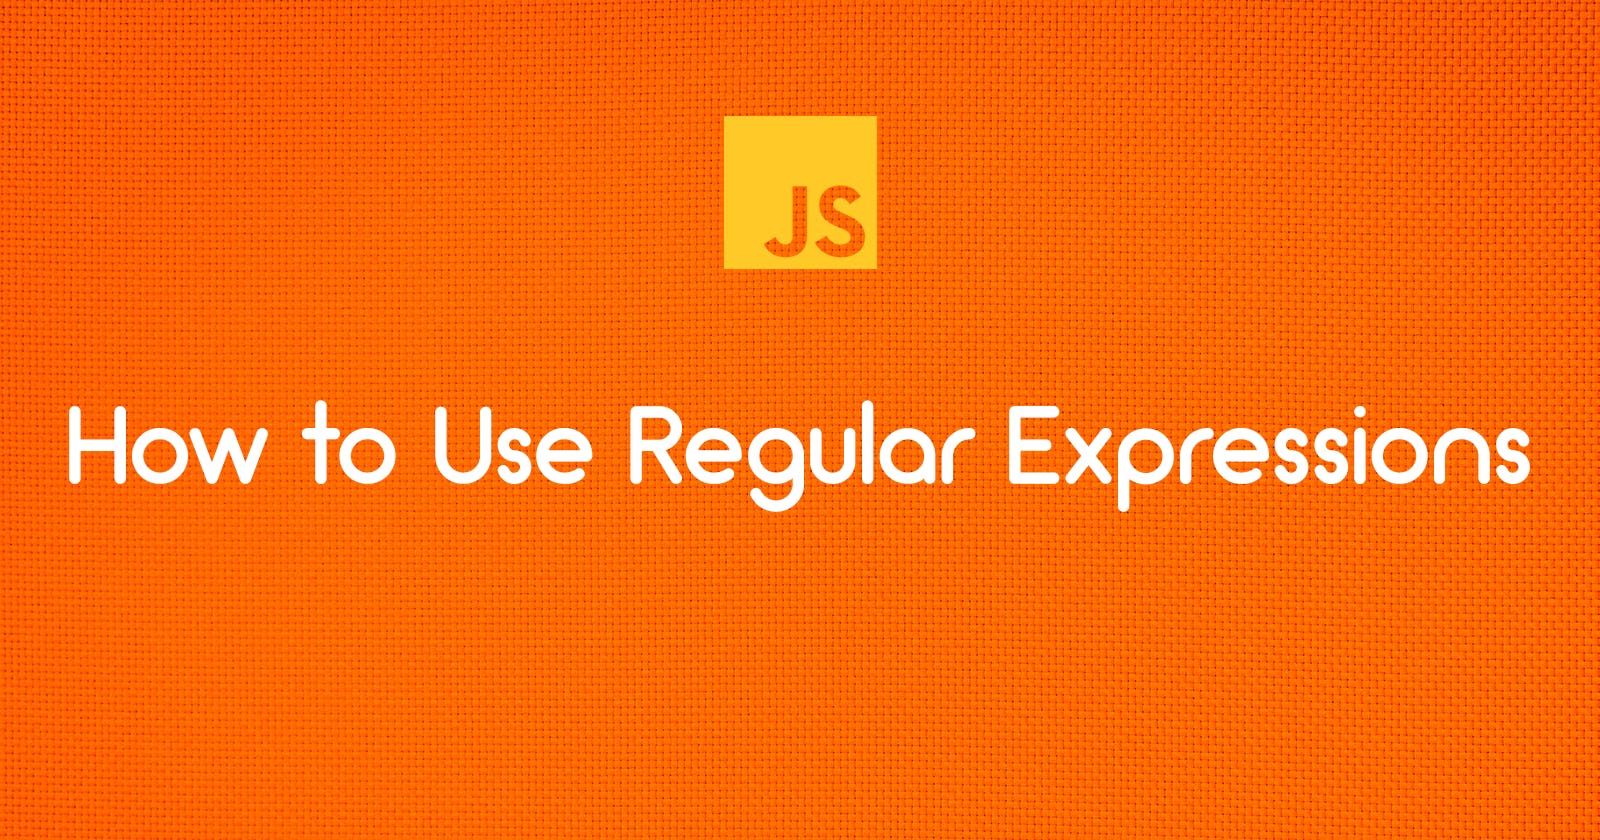 How to Use Regular Expressions